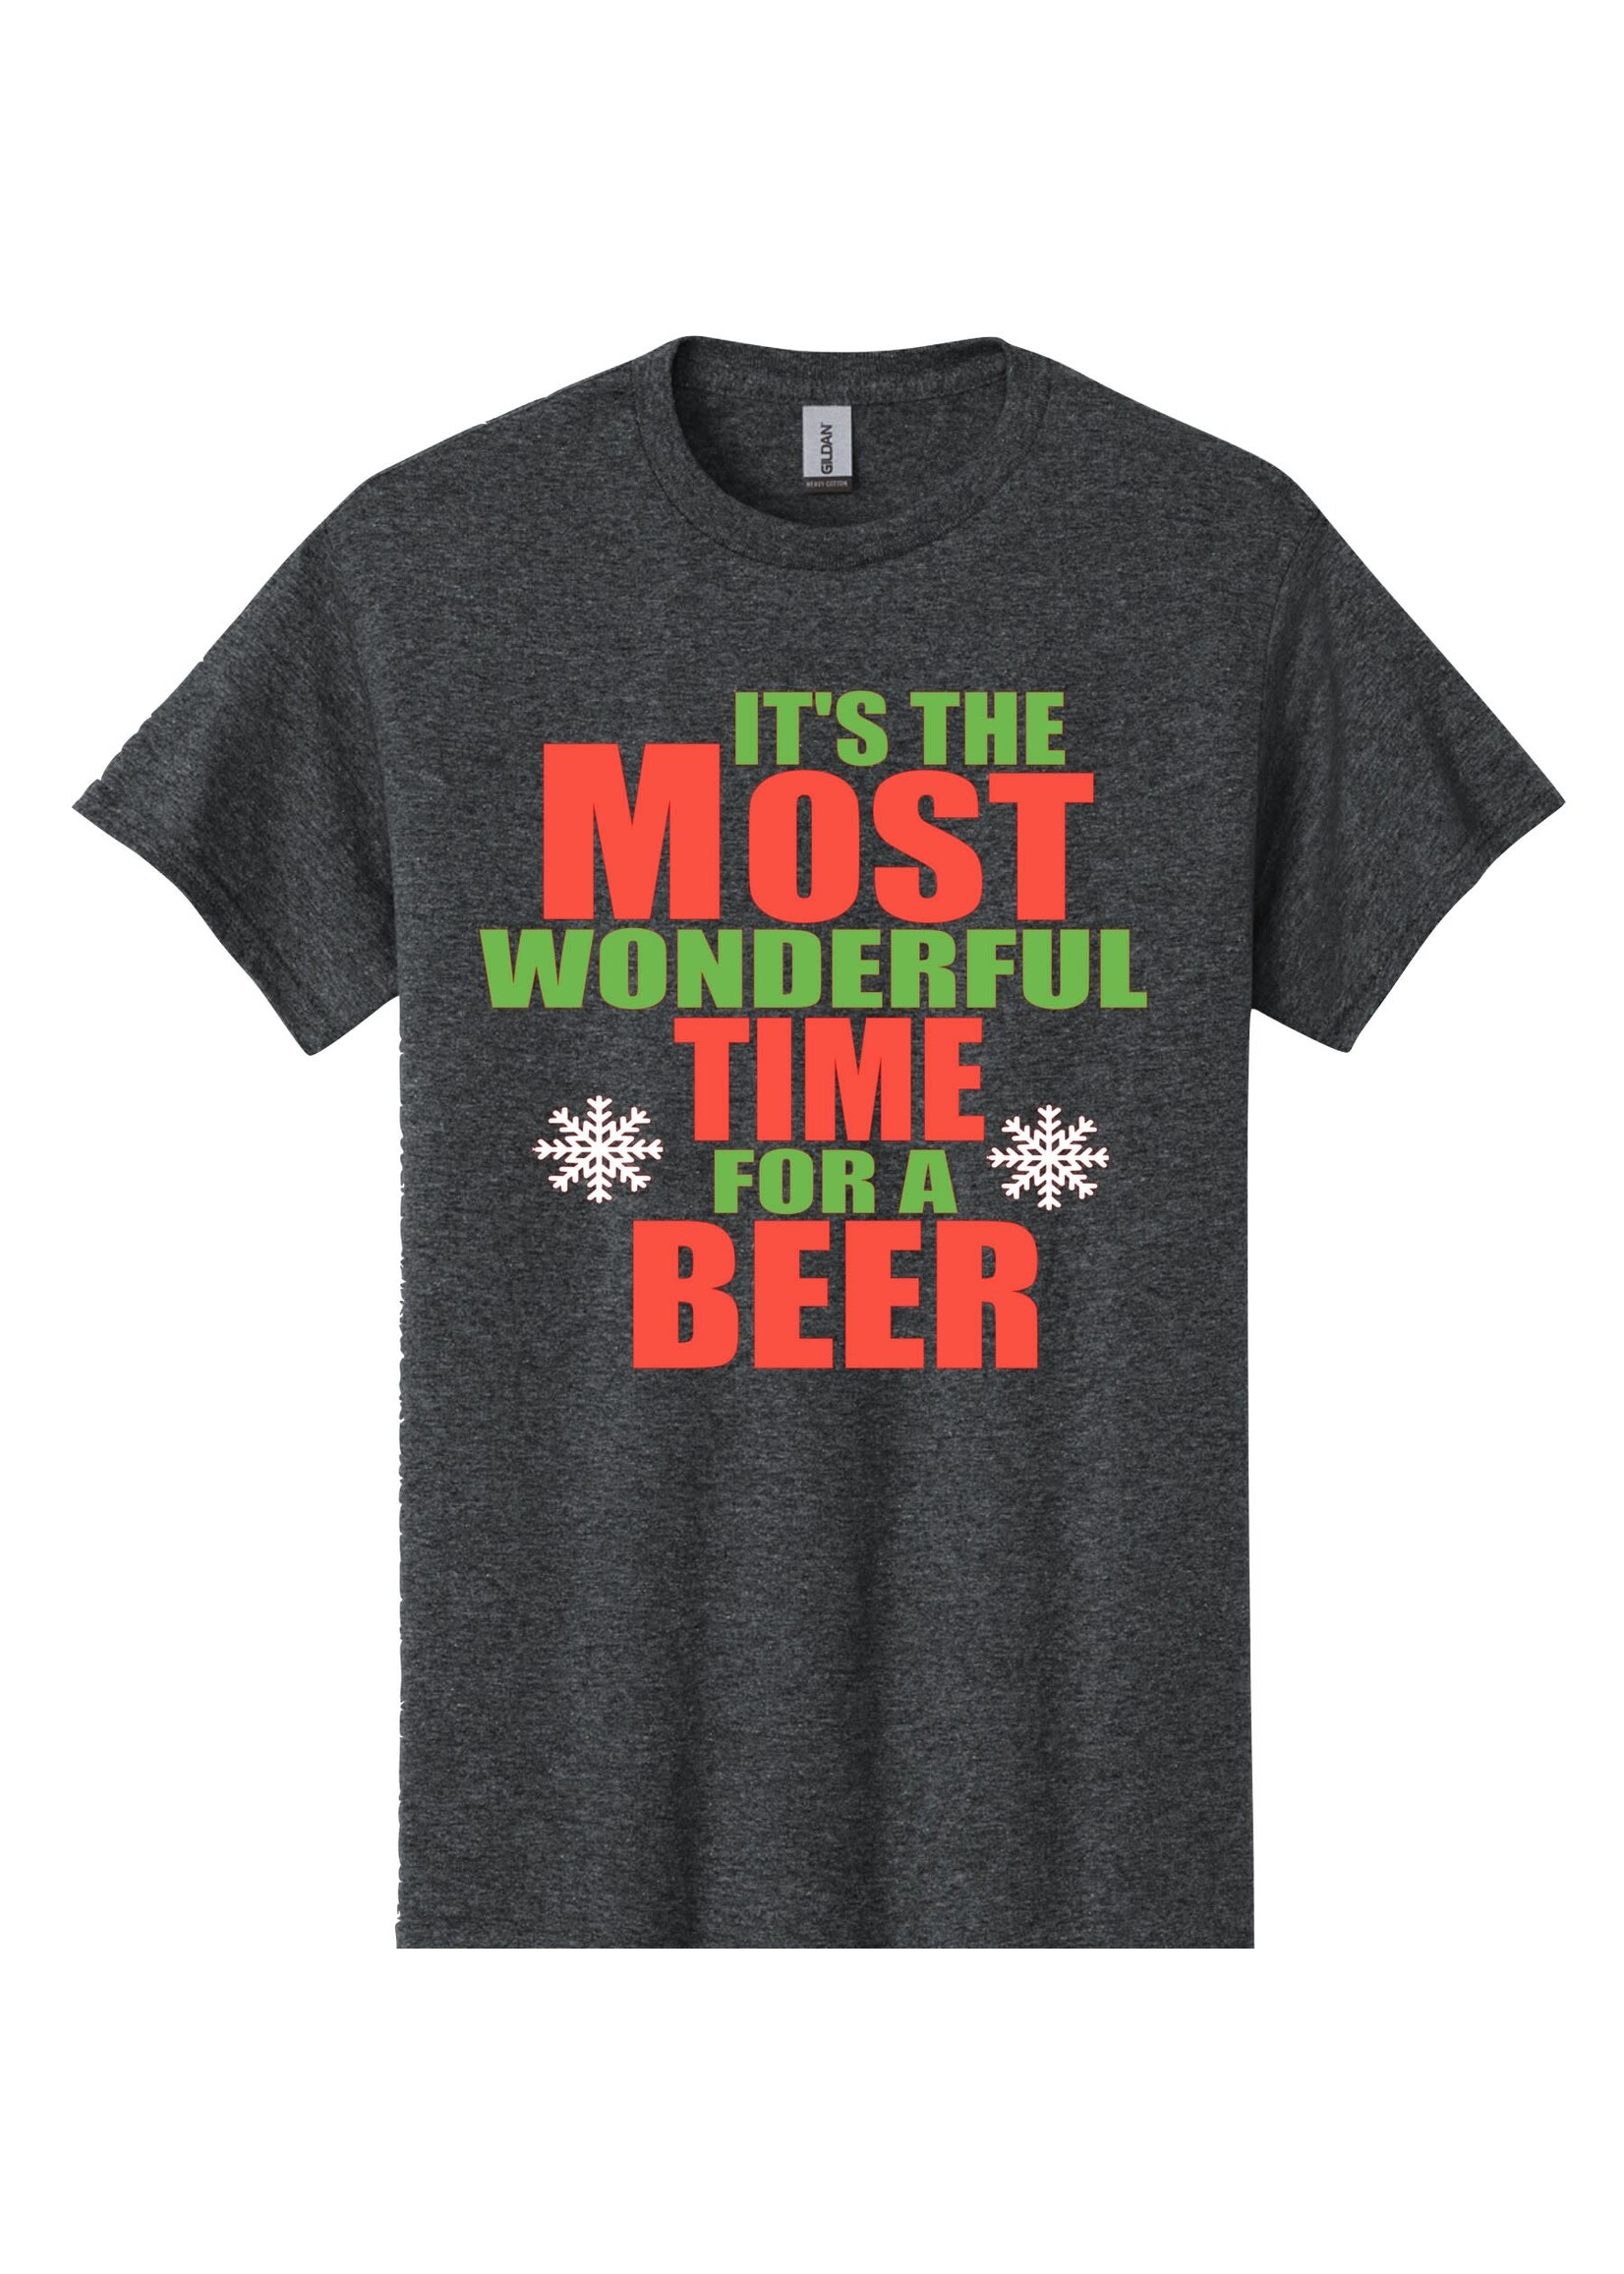 It's the most wonderful time for a beer t-shirt